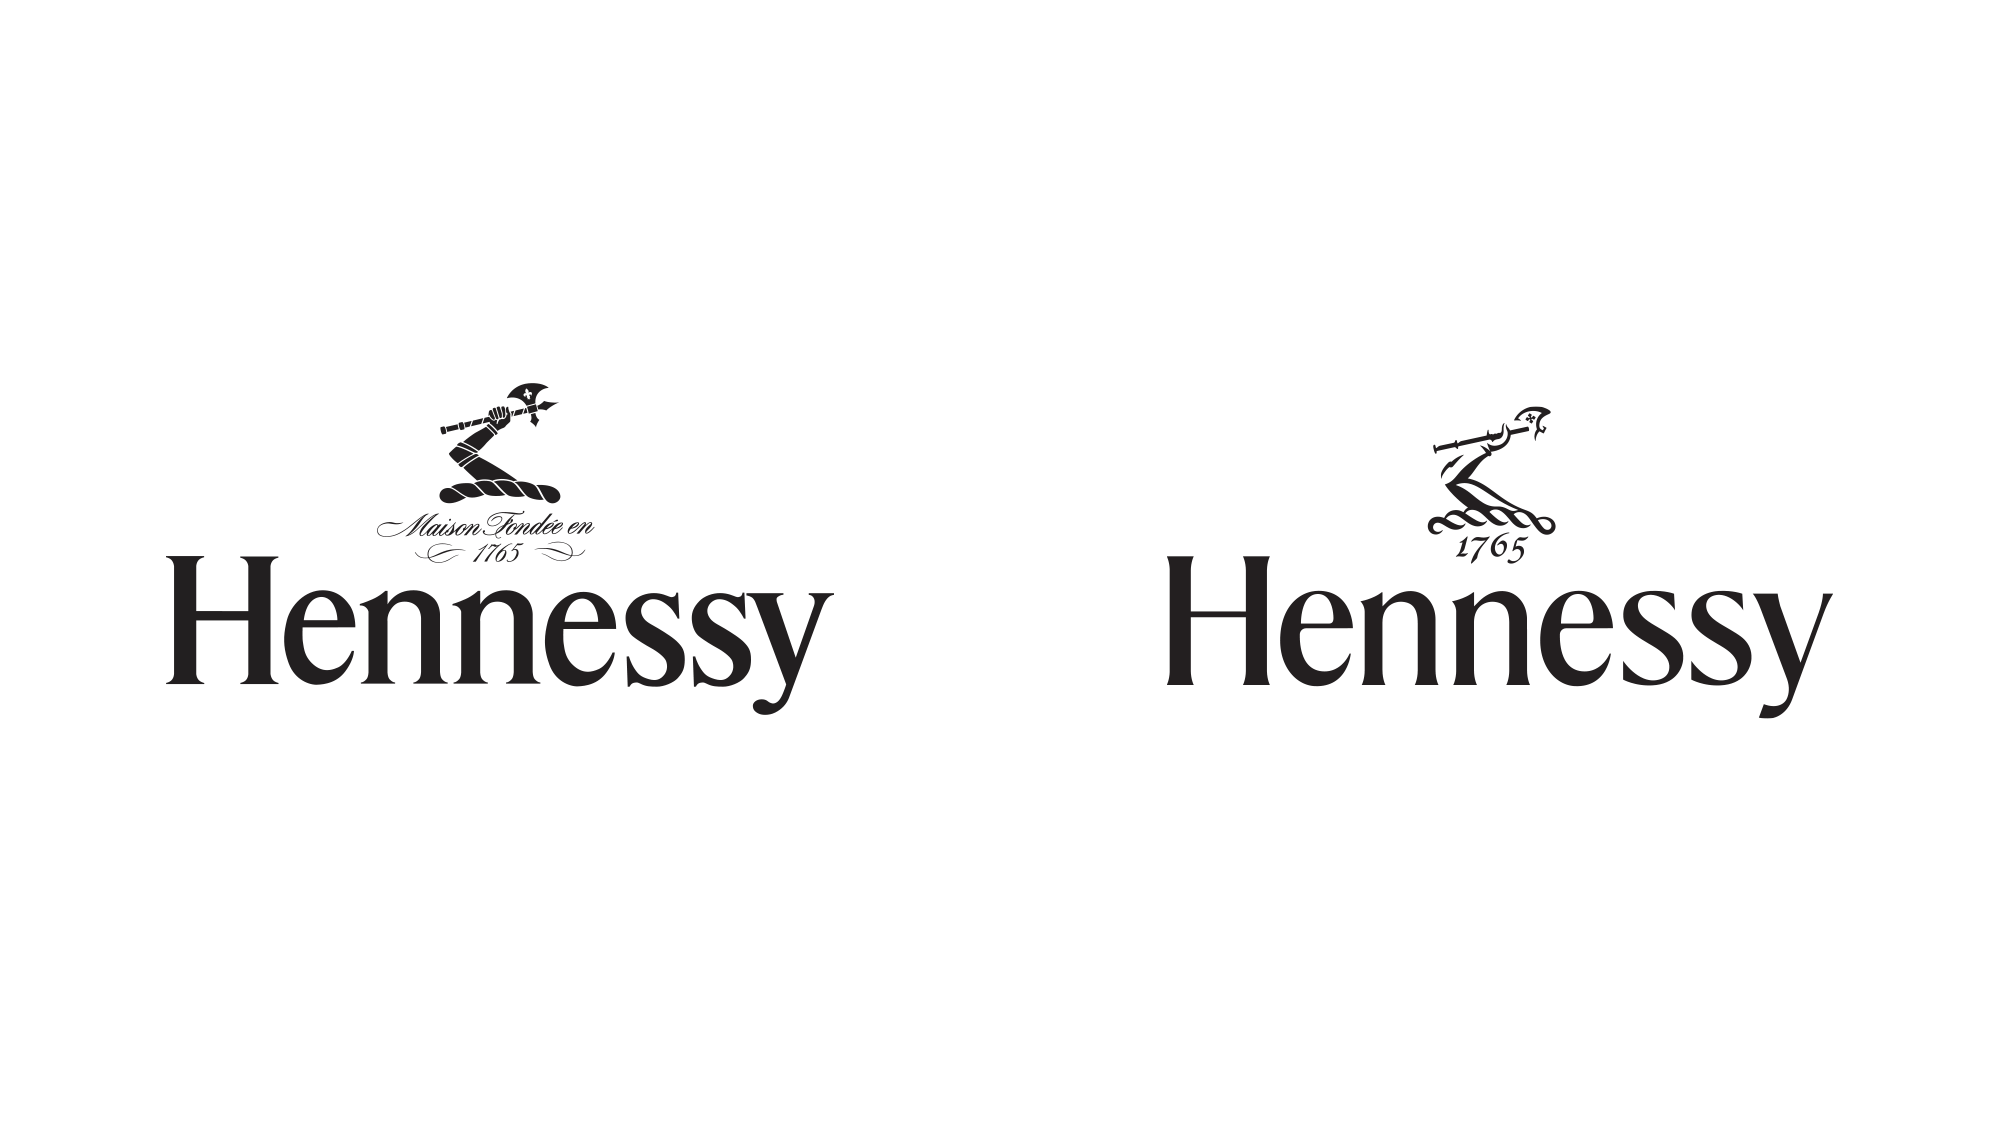 Brand New: New Logo, Identity, and Packaging for Hennessy by NR2154